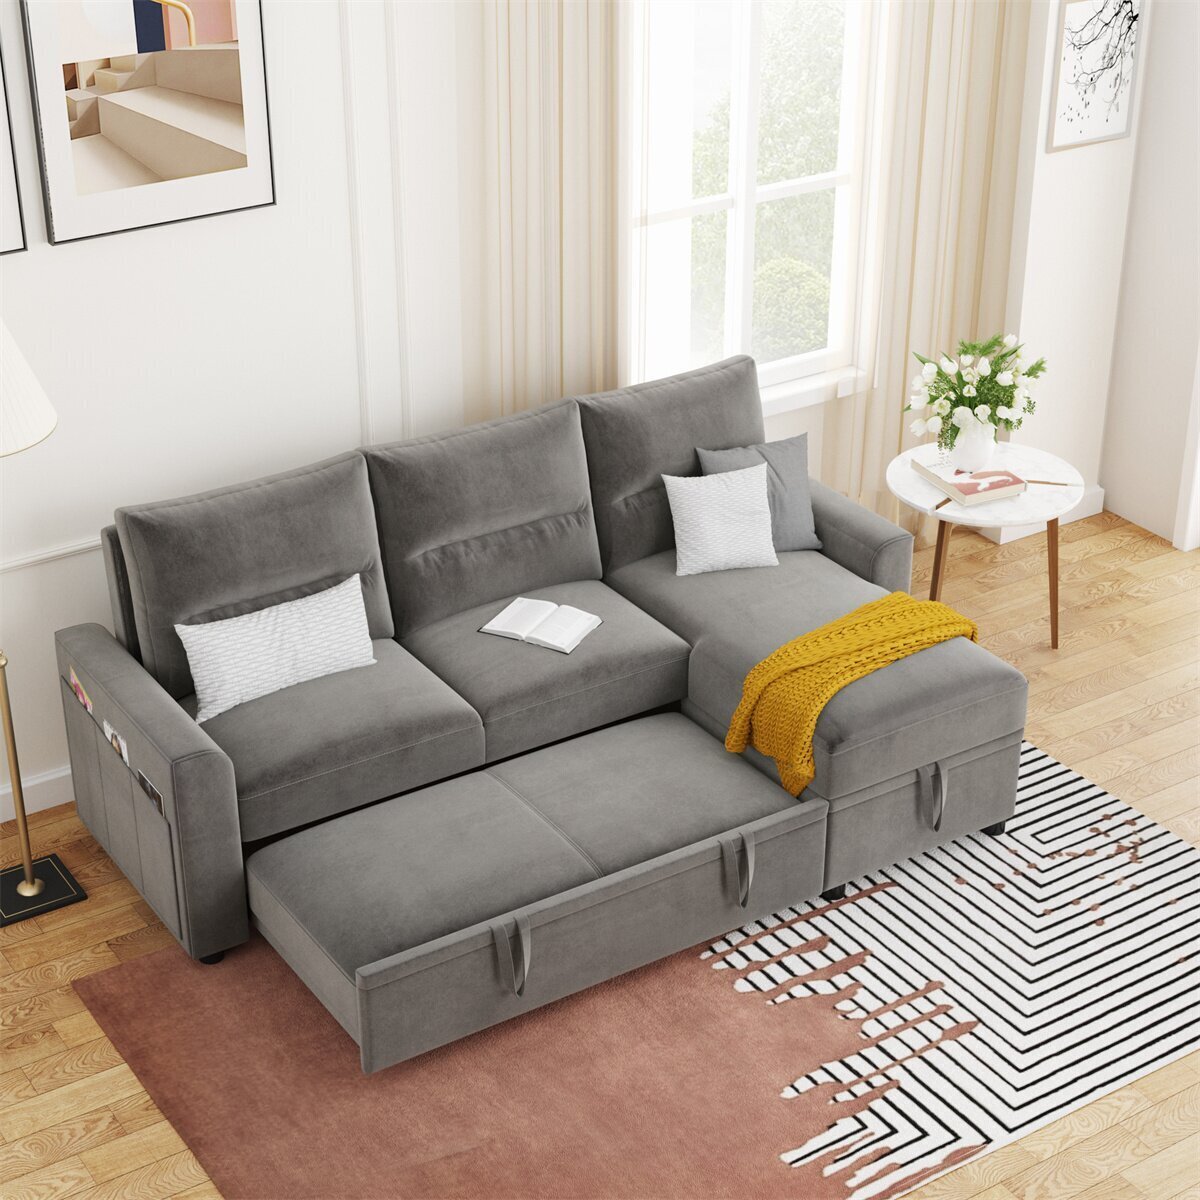 Soft Modular L Shaped Sofa With Clever Built In Bed